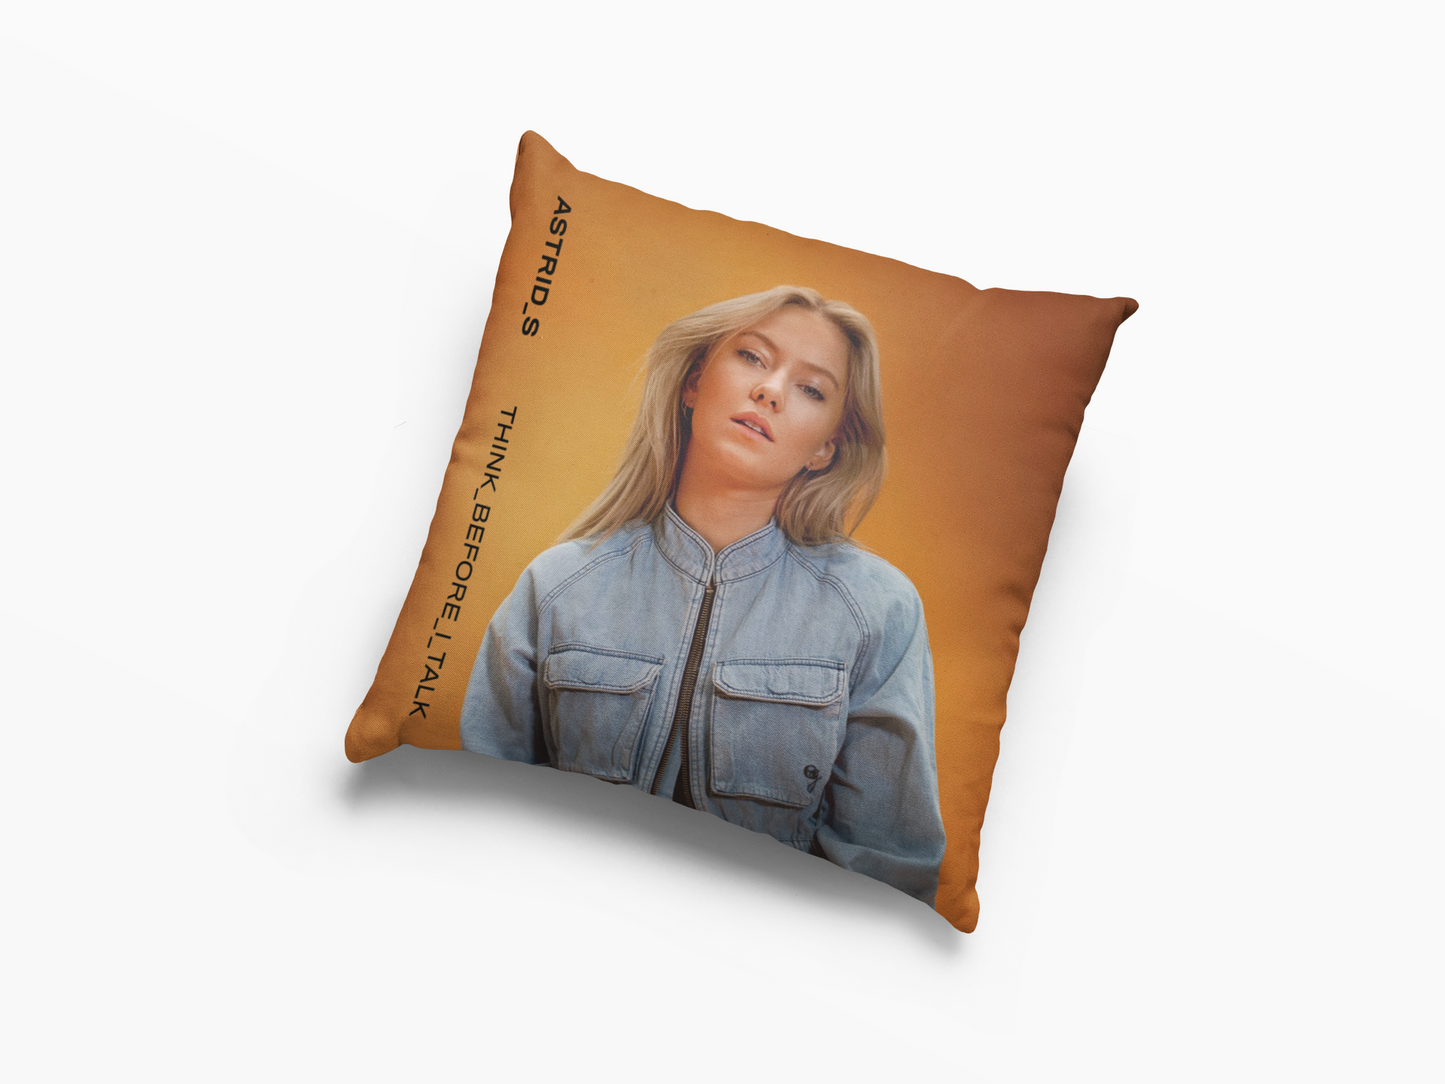 Astrid S Think Before I Talk Cushion Case / Pillow Case